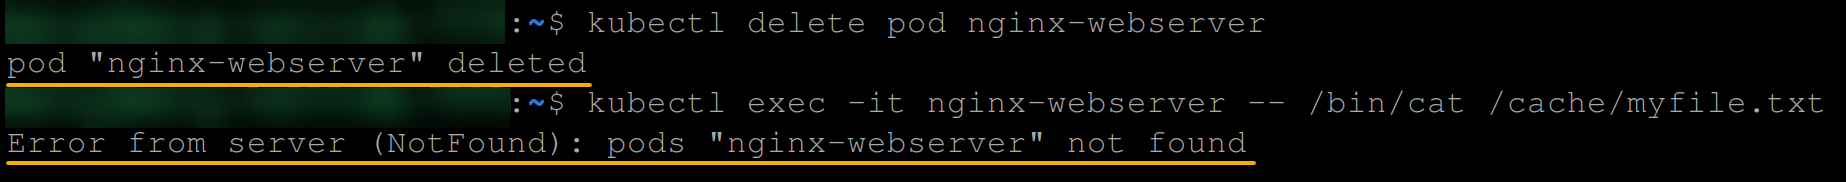 Deleting the nginx-webserver pod and confirming data persistence